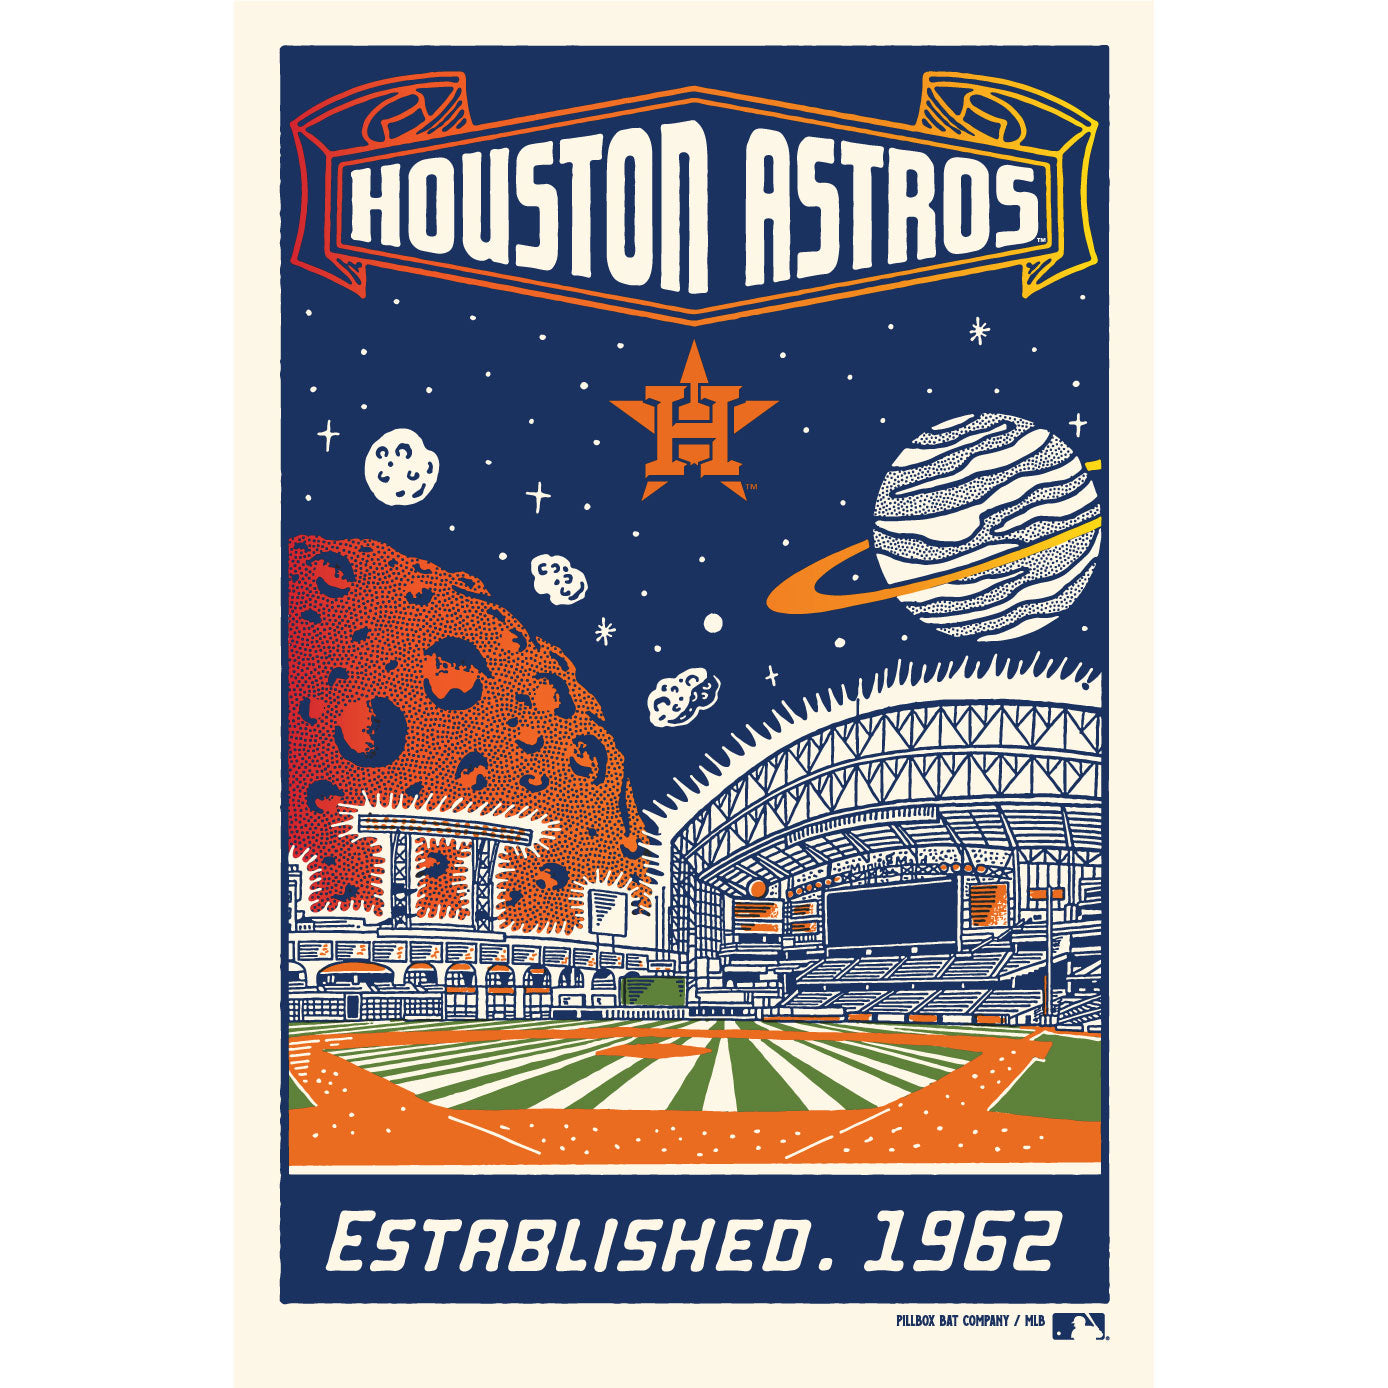 Official Vintage Astros Clothing, Throwback Houston Astros Gear